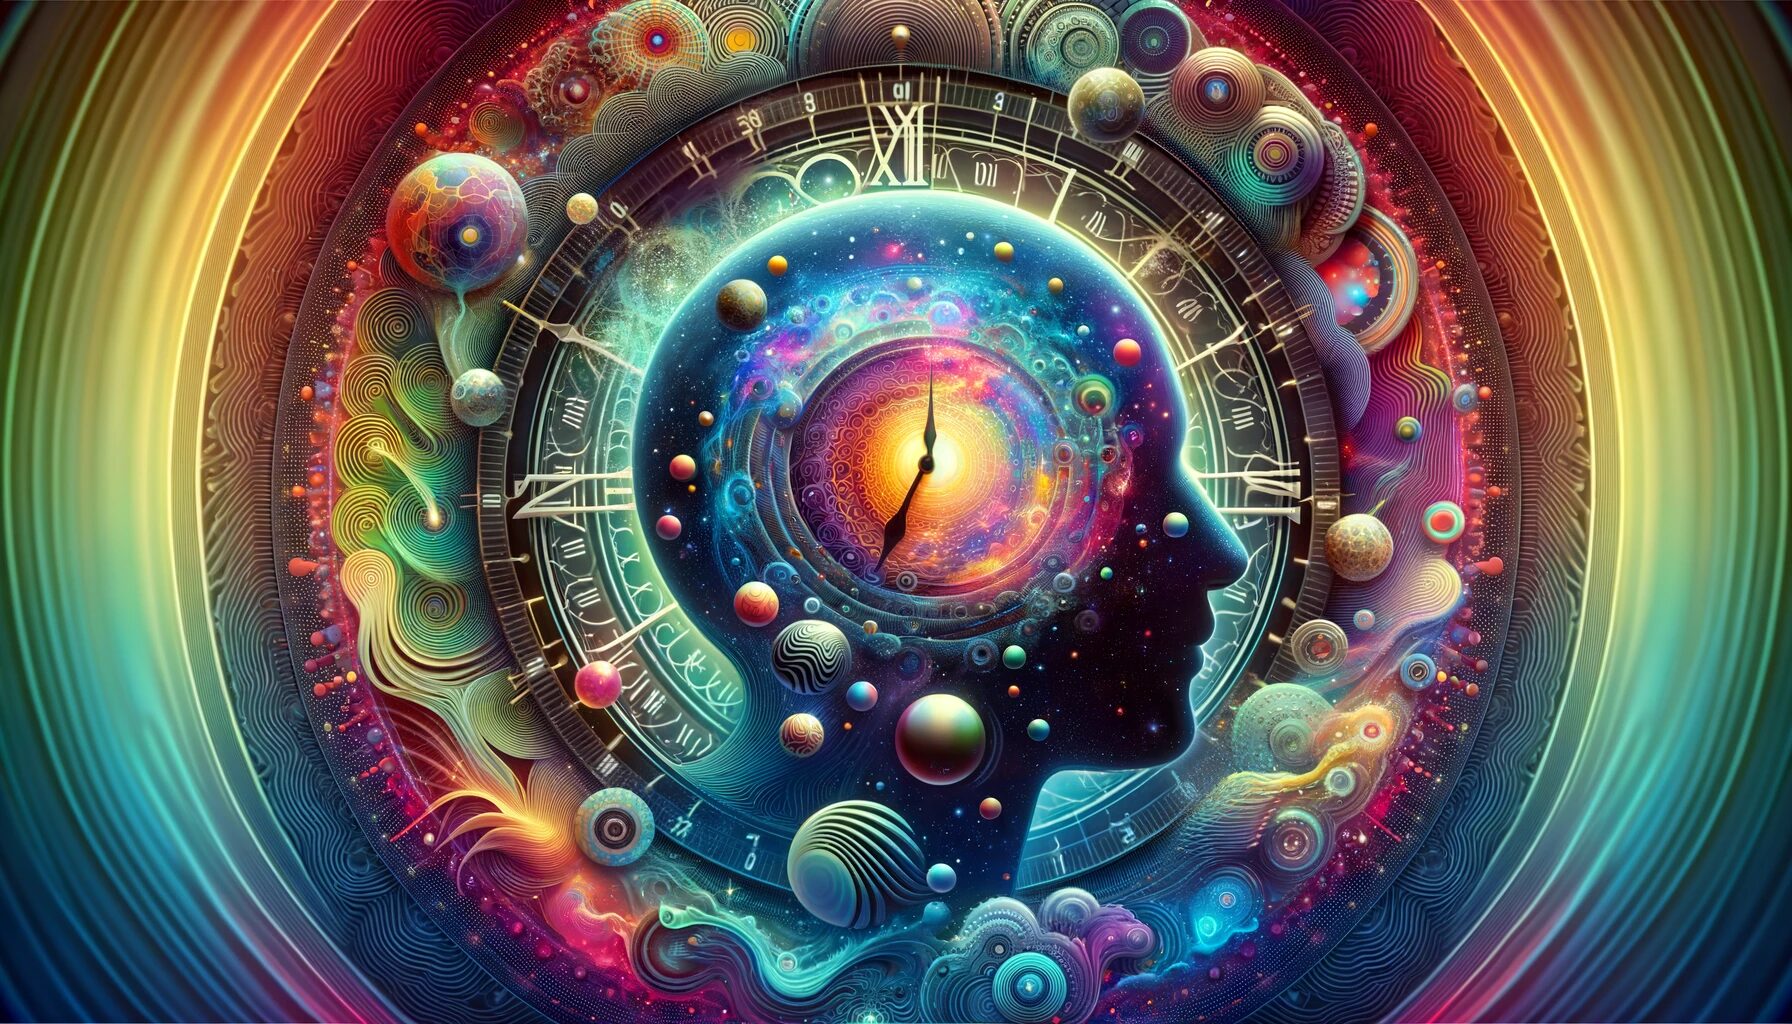 How long does DMT last